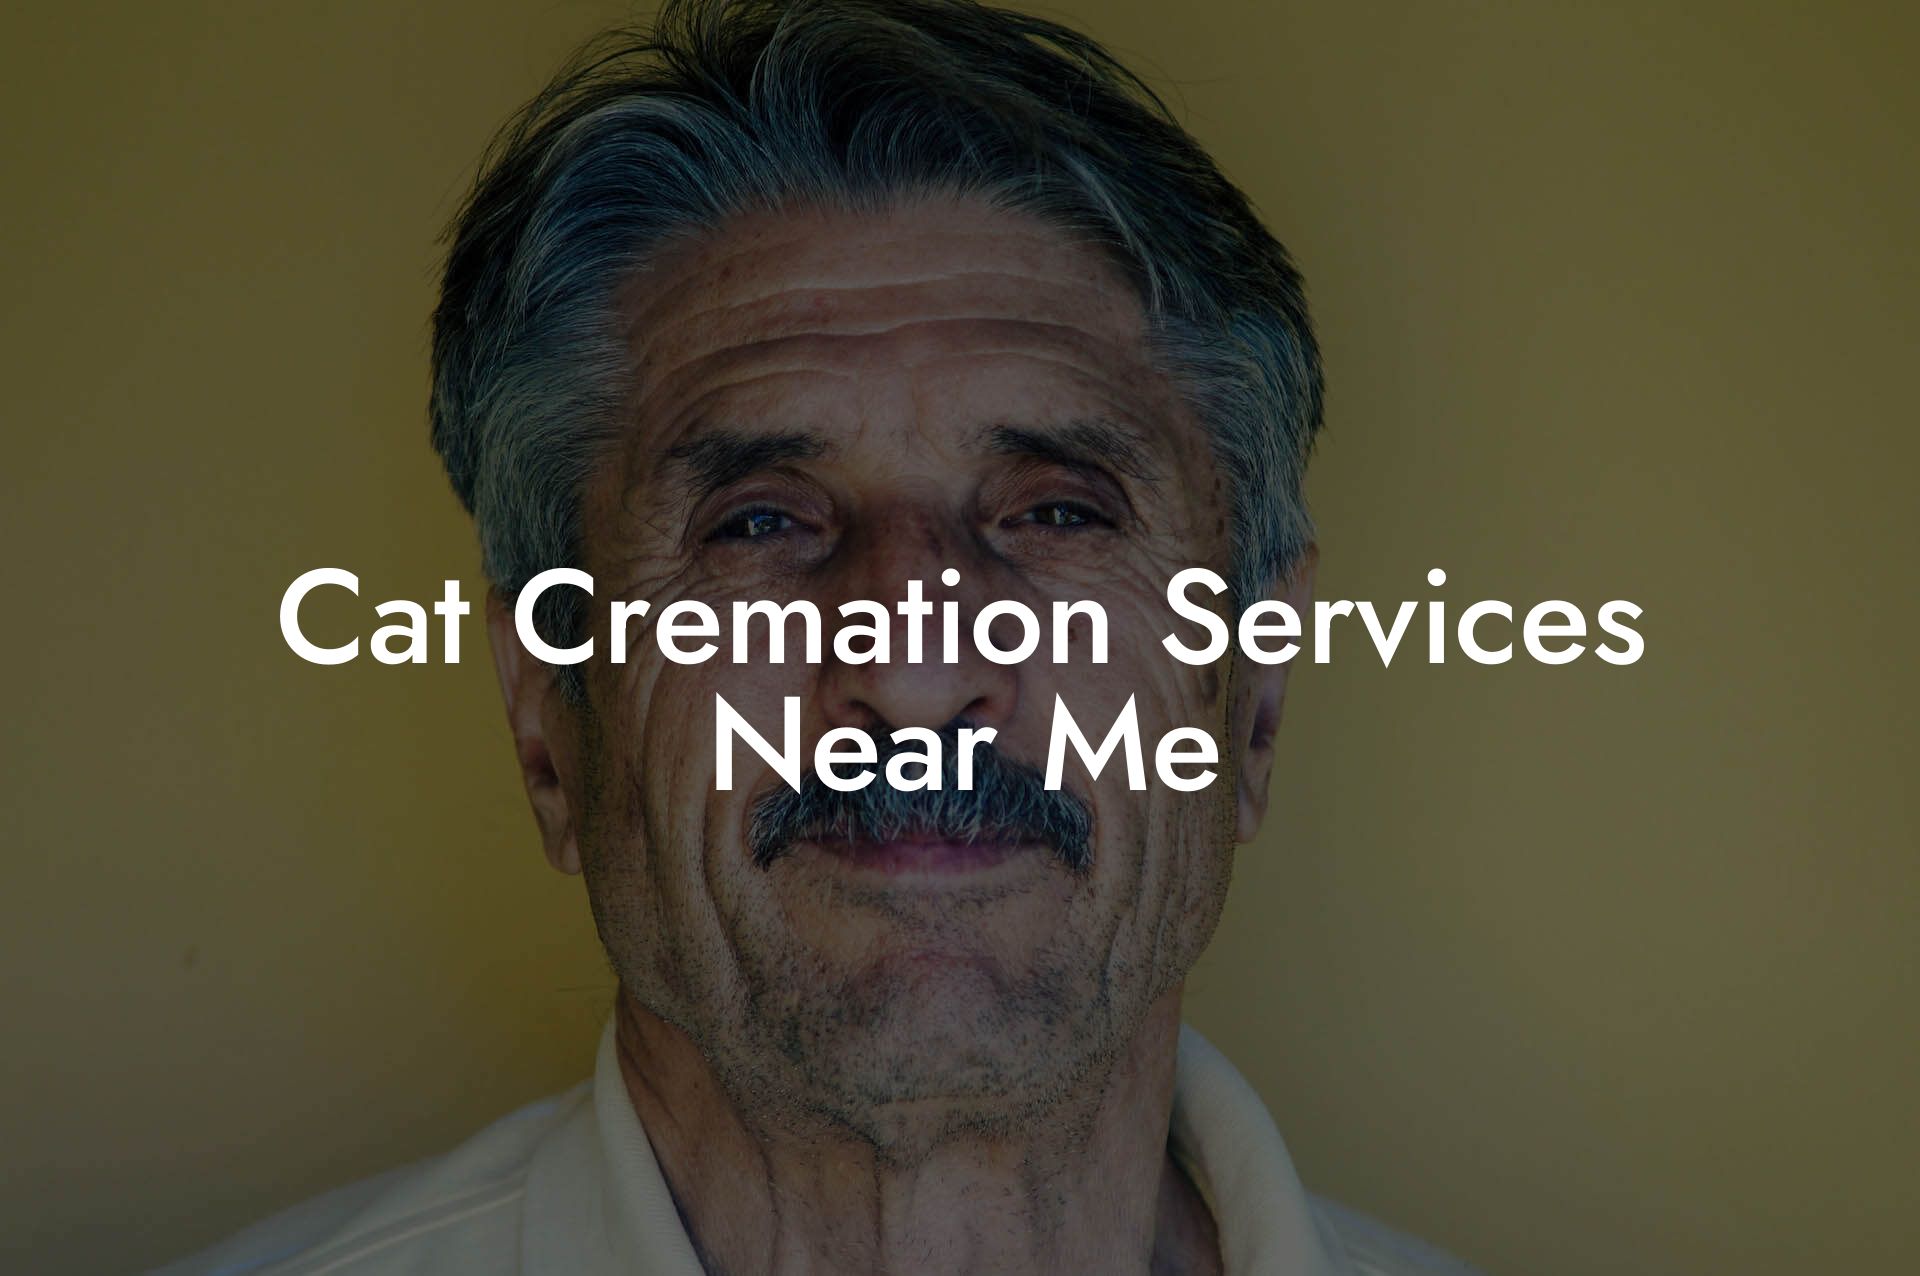 Cat Cremation Services Near Me